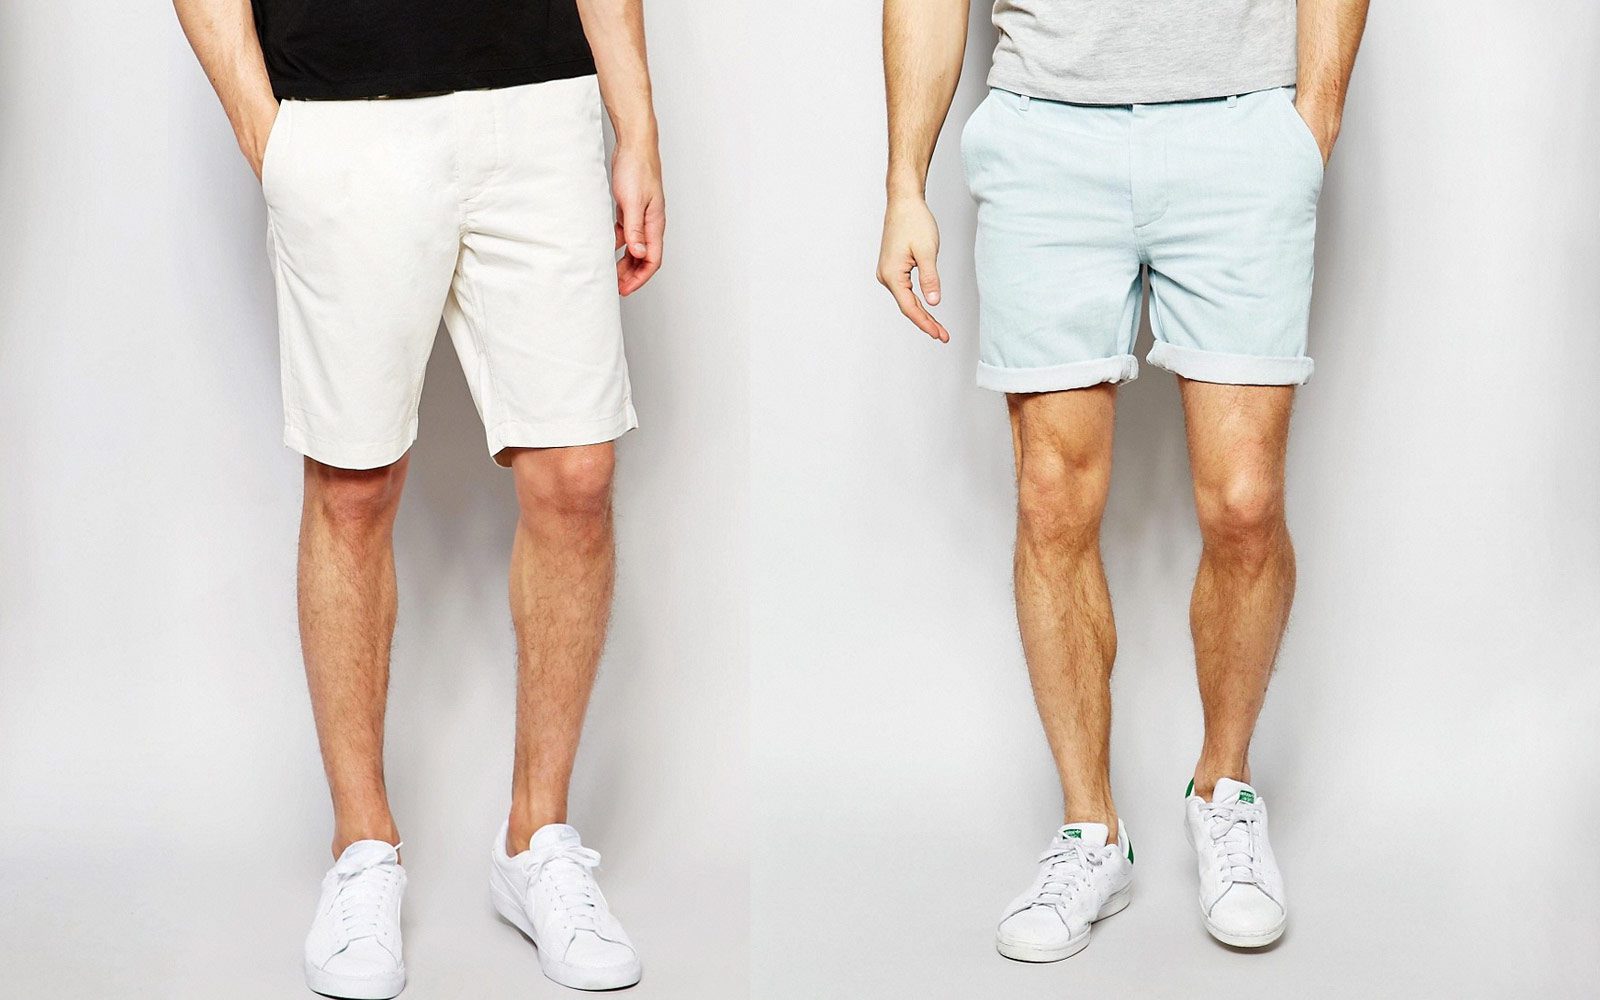 Rules Of: Wearing Shorts - The GentleManual